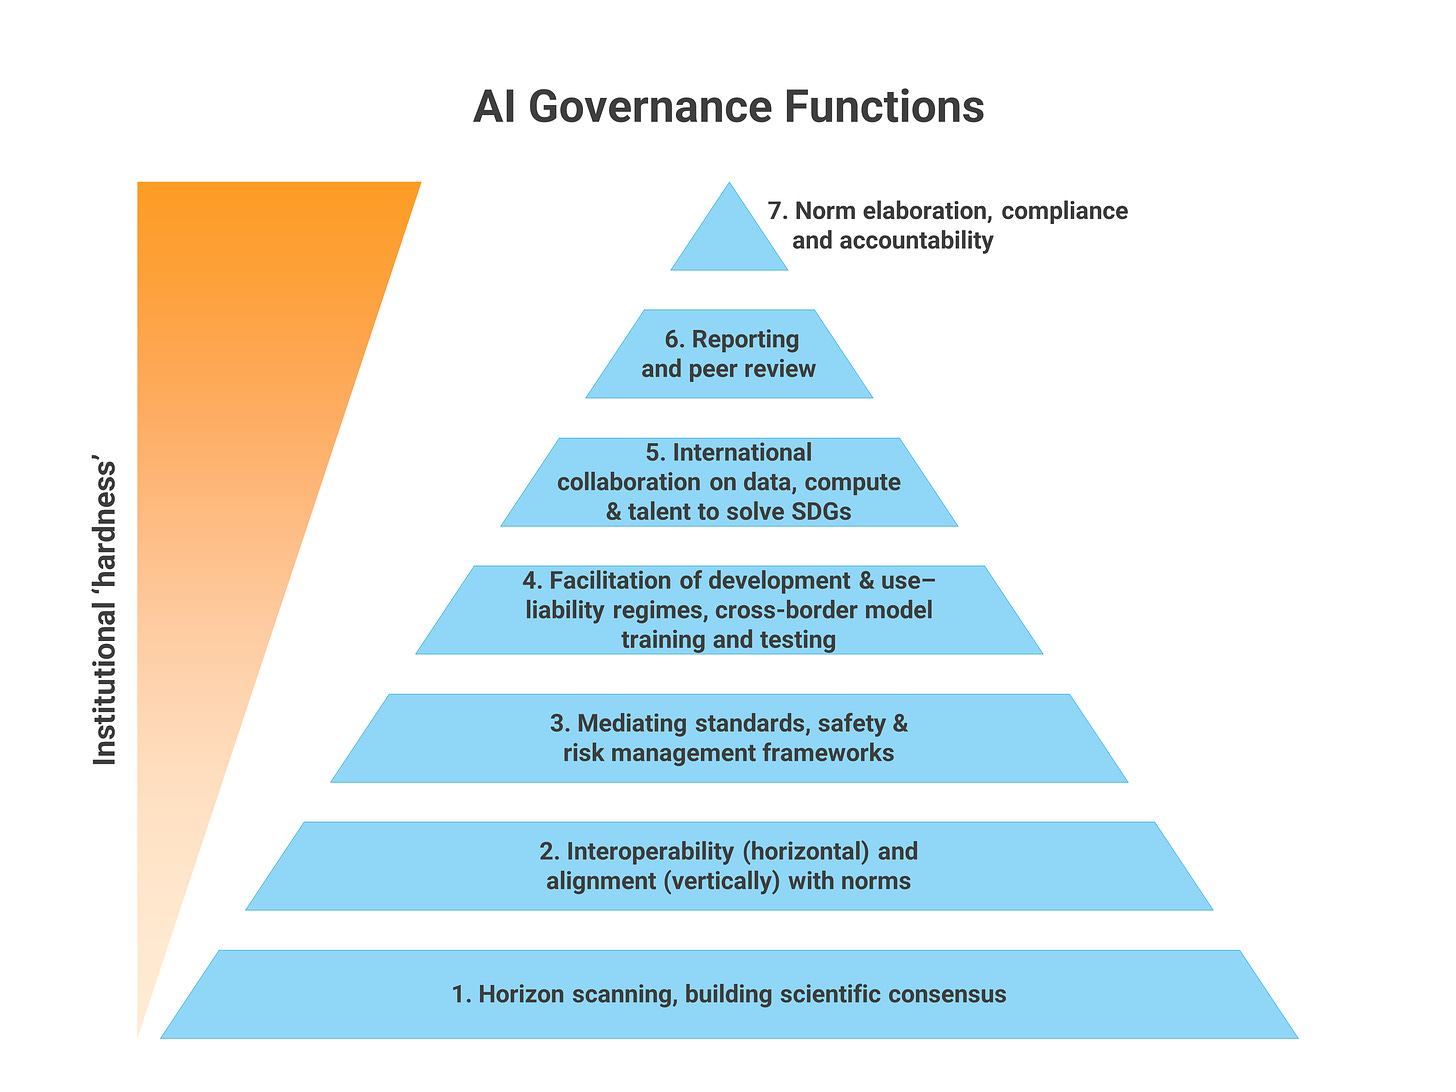 Pyramid of 7 AI Governance Functions proposed by the interim report:
1.    Horizon scanning, building scientific consensus
2.    Interoperability (horizontal) and alignment (vertically) with norms
3.    Mediating standards, safety & risk management frameworks
4.    Facilitation of development & use-liability regimes, cross-border model training and test
5.    International collaboration on data, compute & talent to solve SDGs
6.    Reporting and peer review
7.    Norm elaboration, compliance and accountability